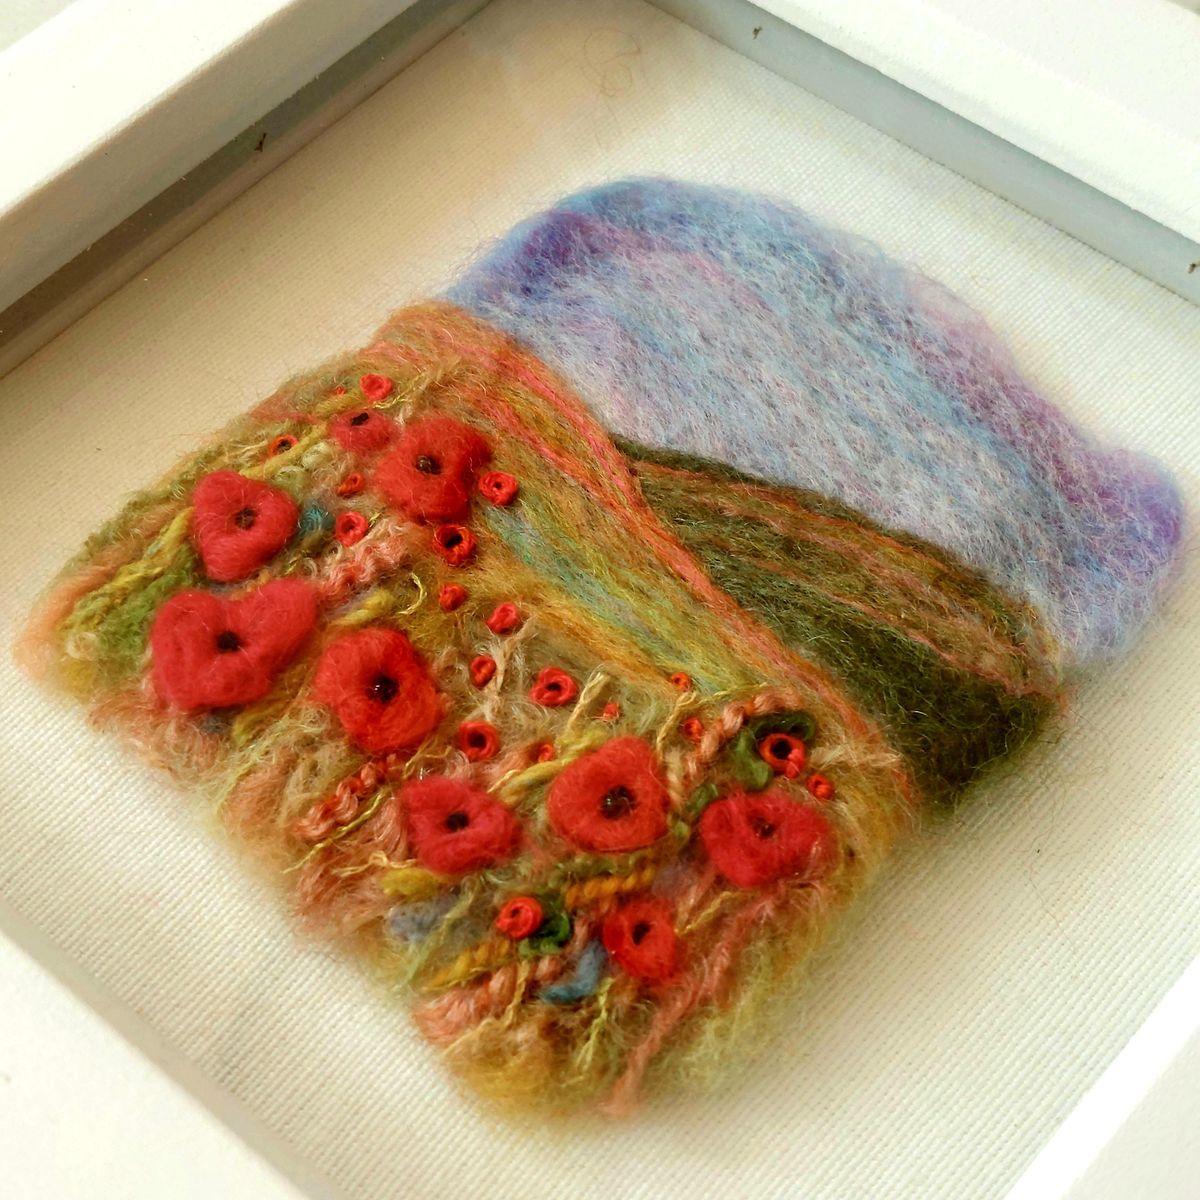 Felted Poppy Landscape - needle felted and embroidered picture